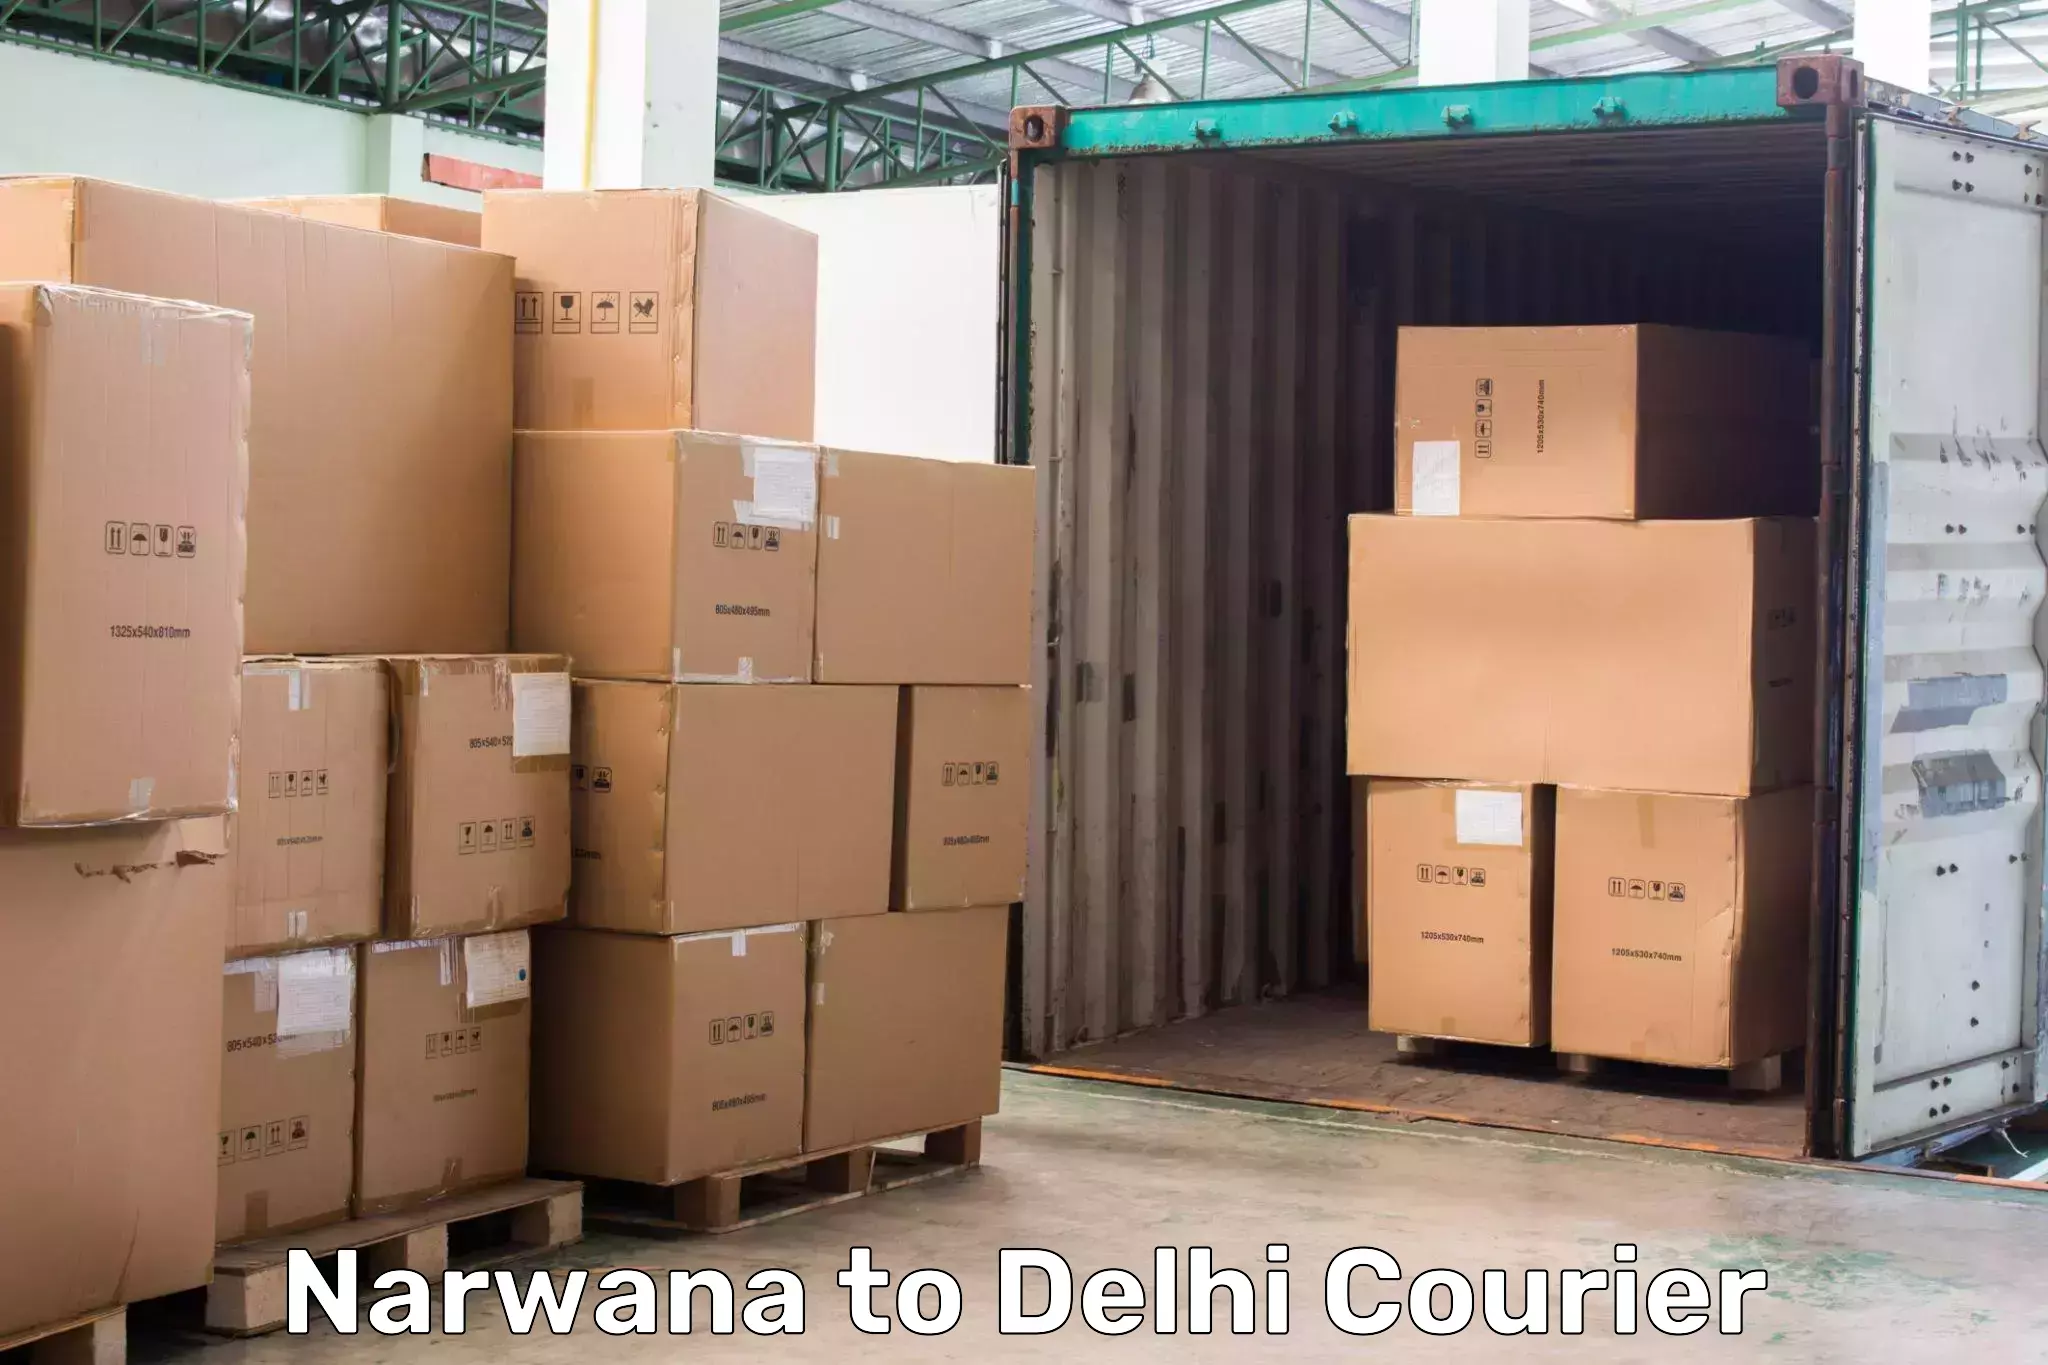 24/7 courier service Narwana to Lodhi Road